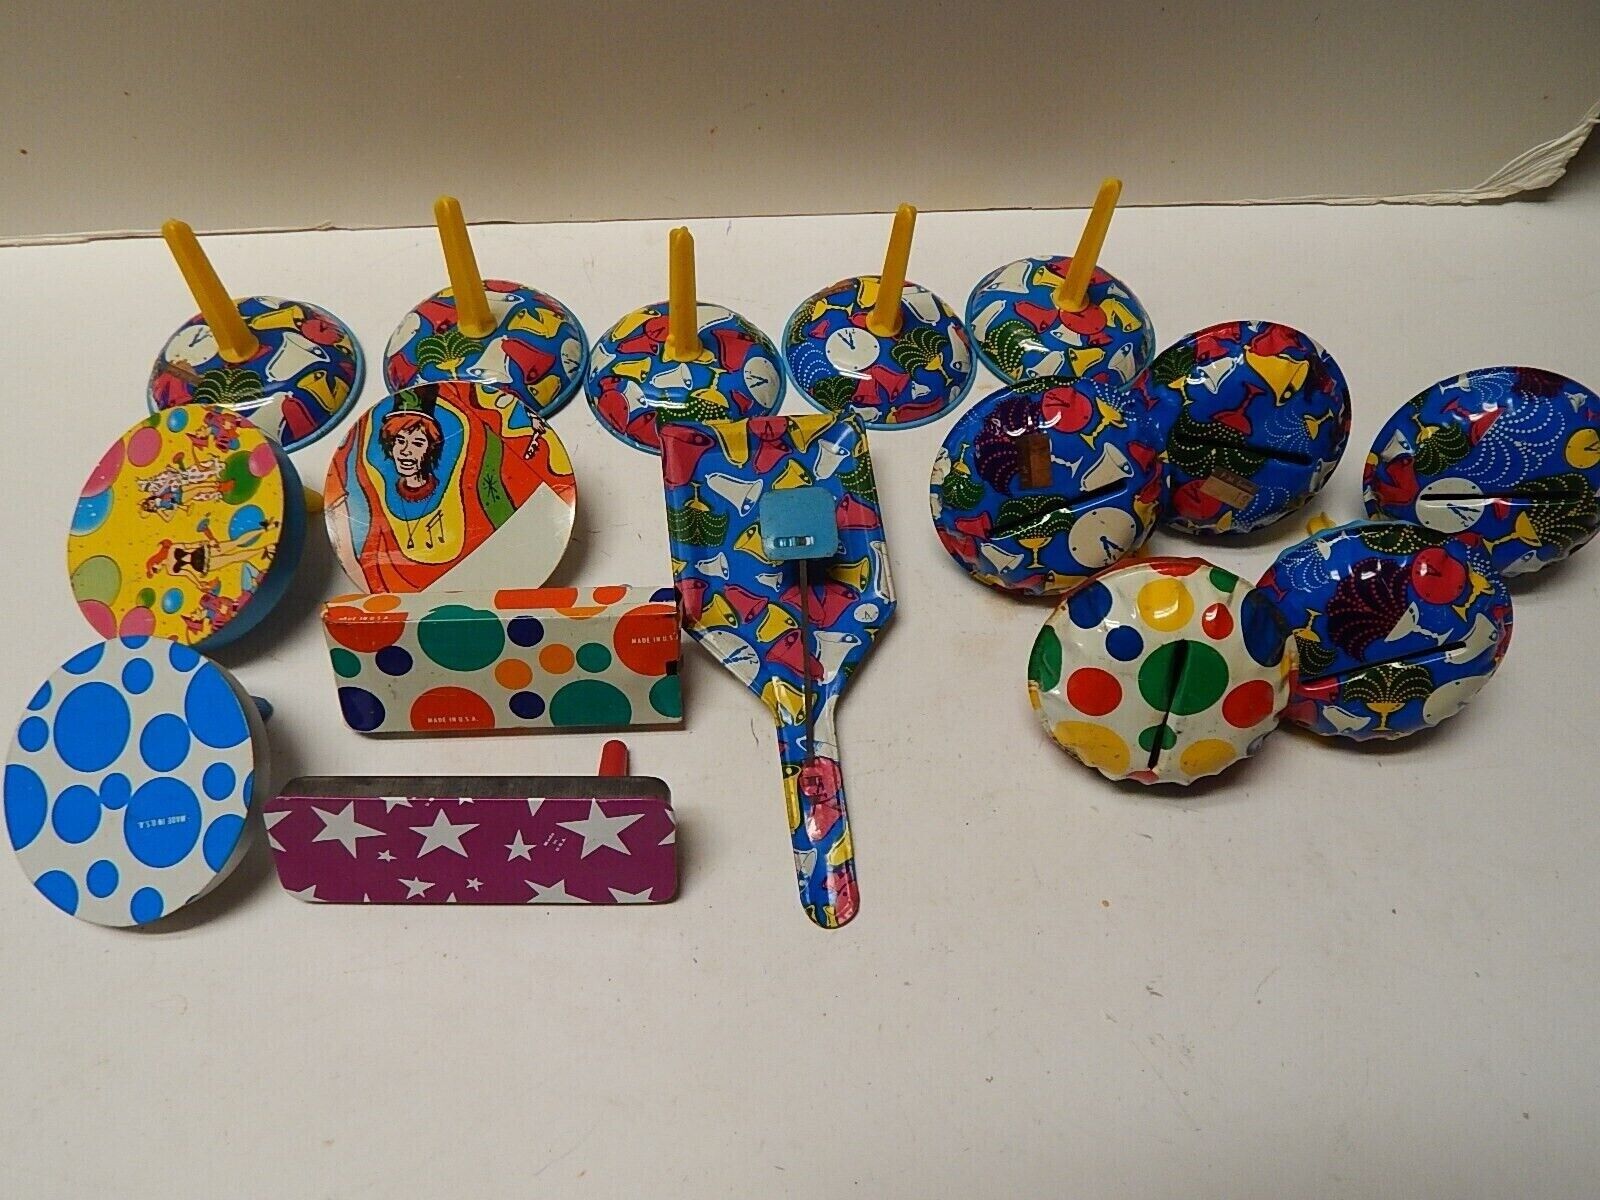 LOT OF 16 VINTAGE PAINTED TIN PARTY NOISE MAKERS MADE IN USA Birthday Baby